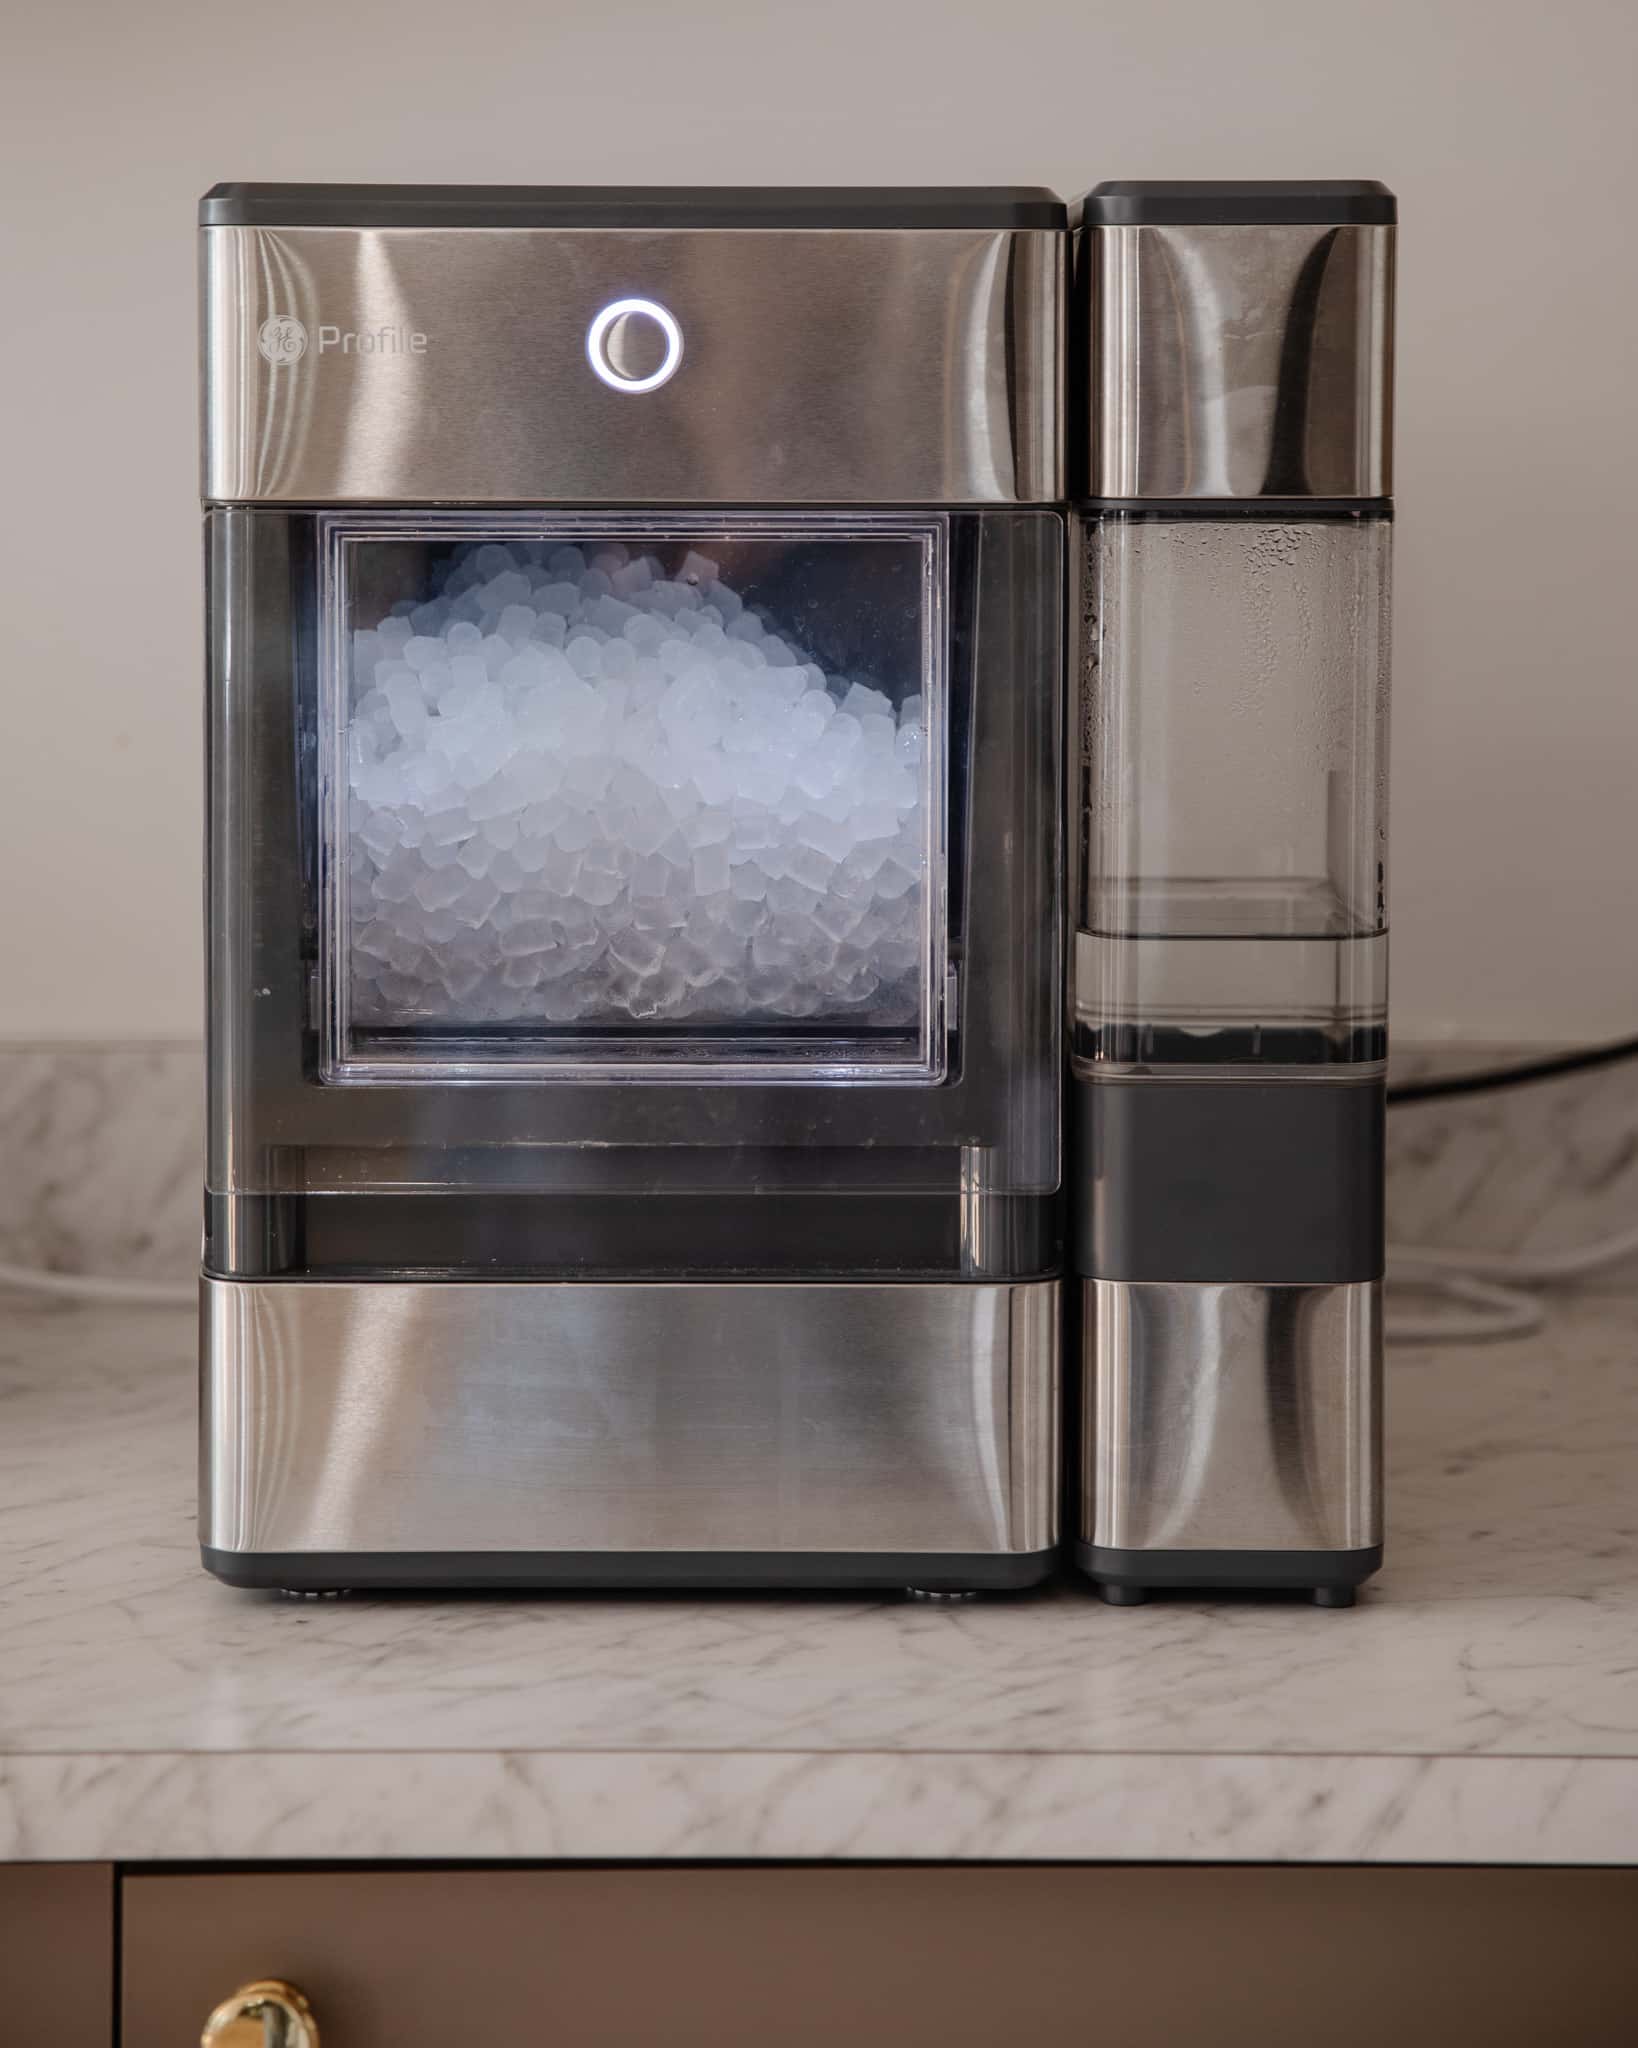 Best Crushed Ice Maker: Top Choices For Your Drinks 